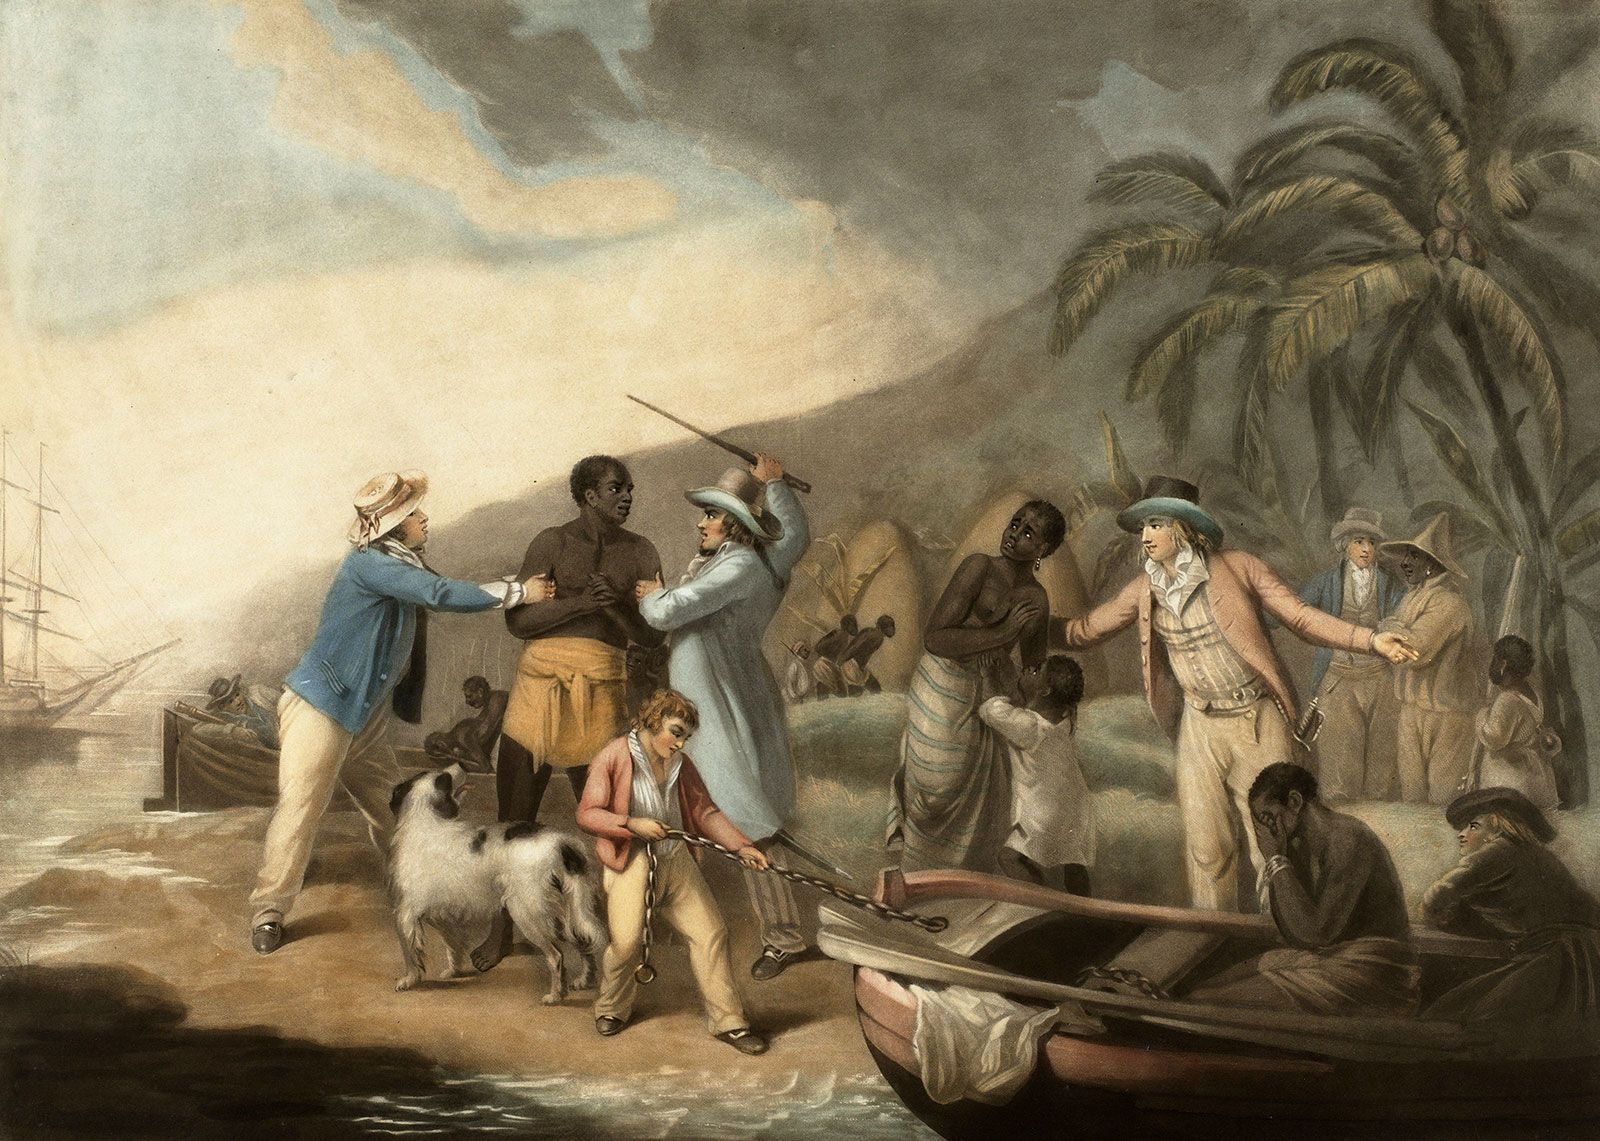 on the slave trade